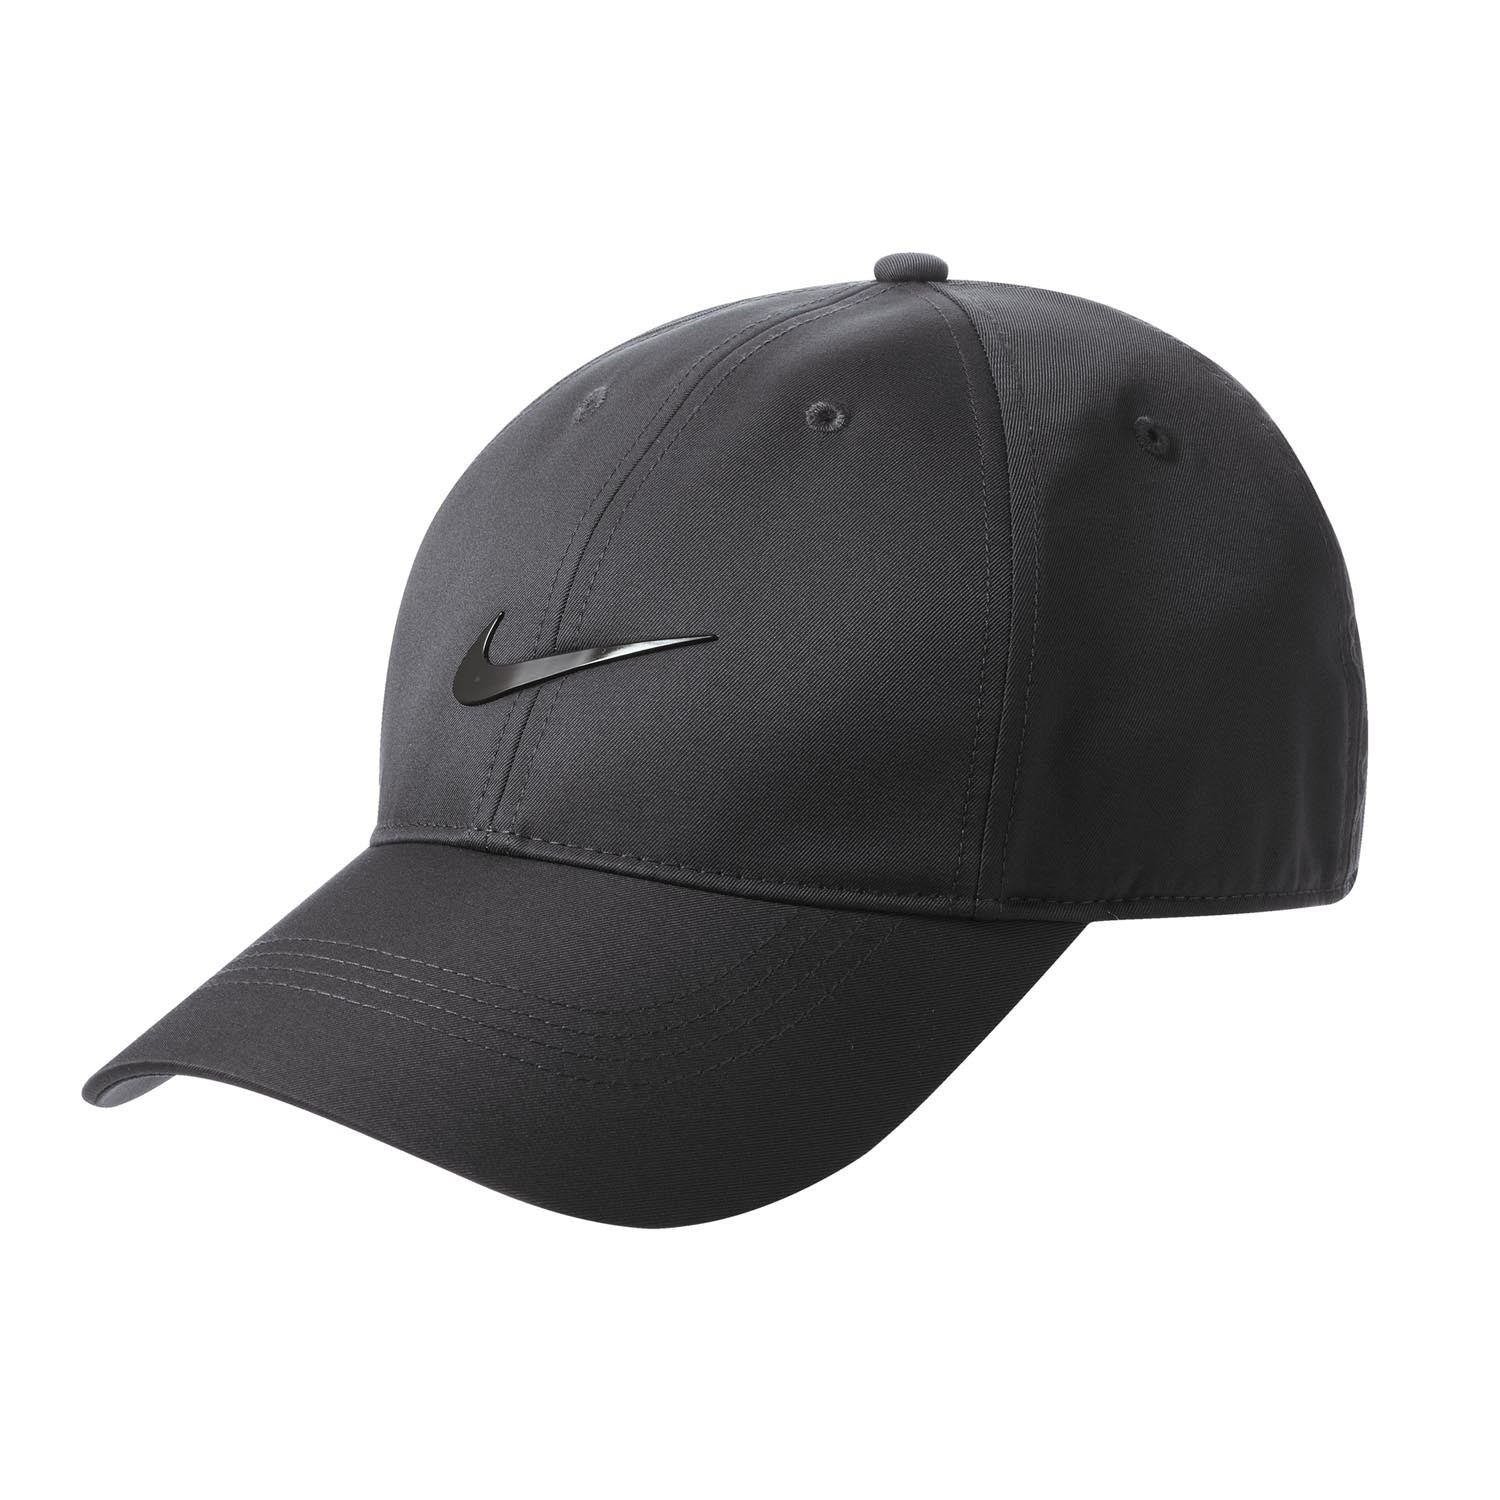 Embroidered Nike Charcoal Grey Dri-FIT Swoosh Front Cap | Nike